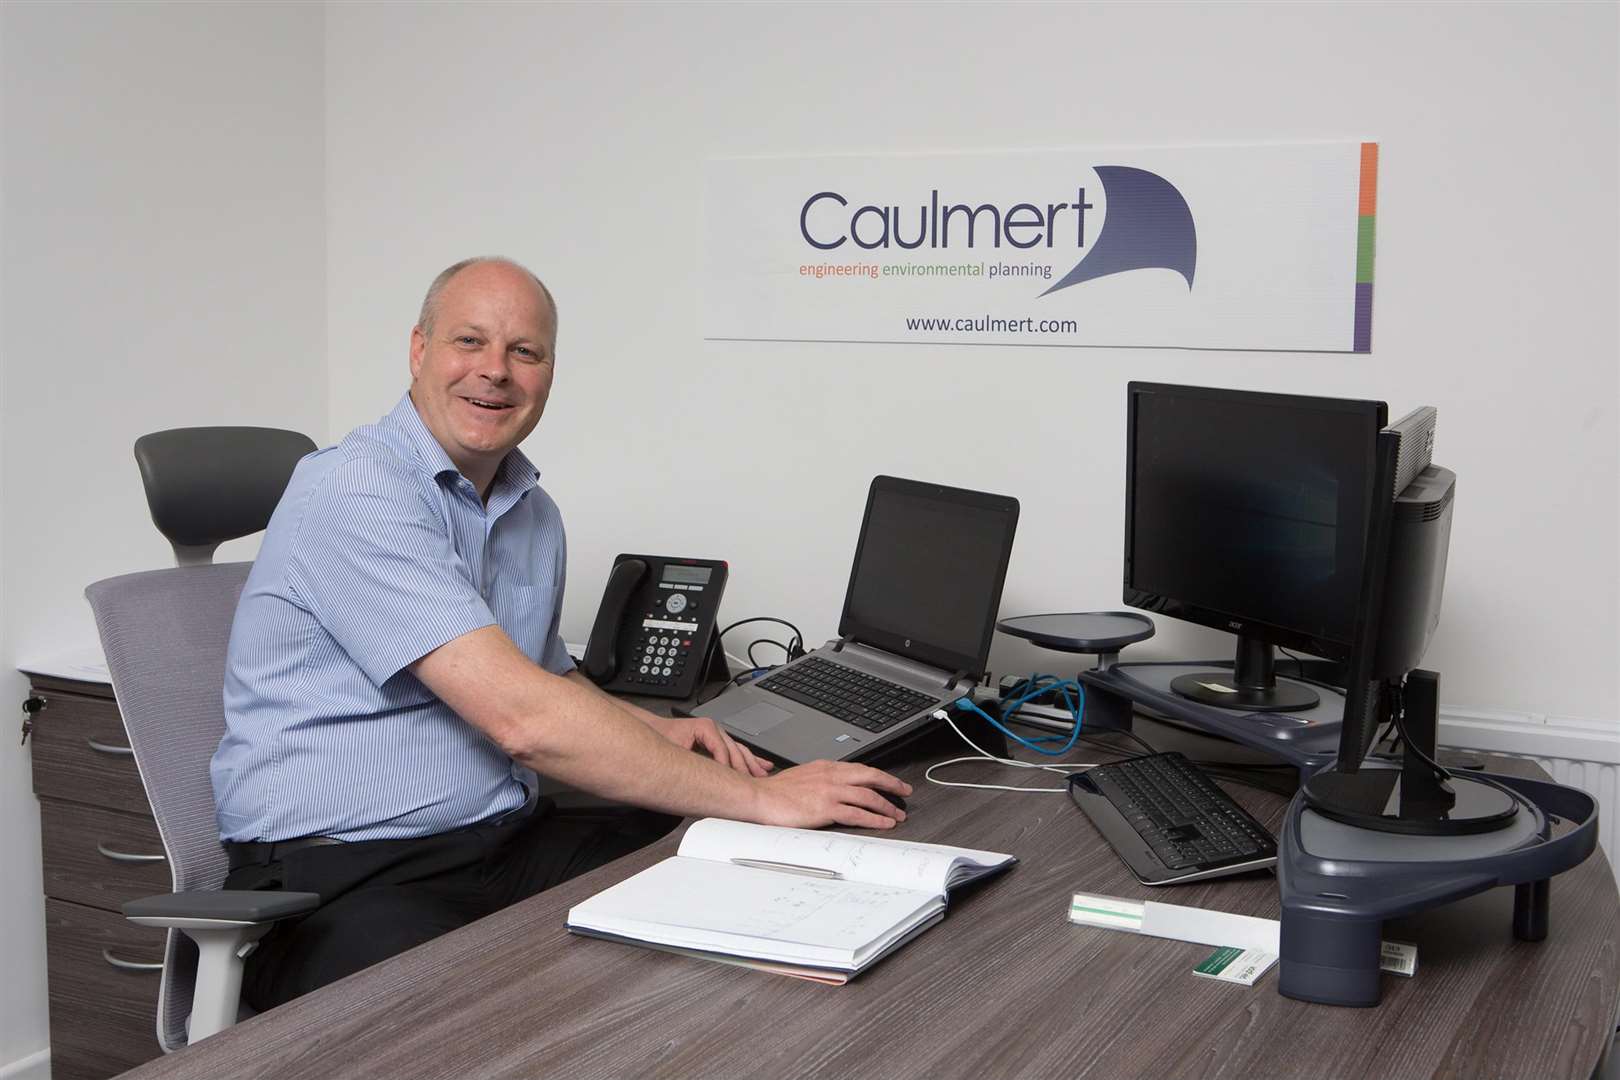 Caulmert's Ian Crofts is delighted with latest contract (4371175)